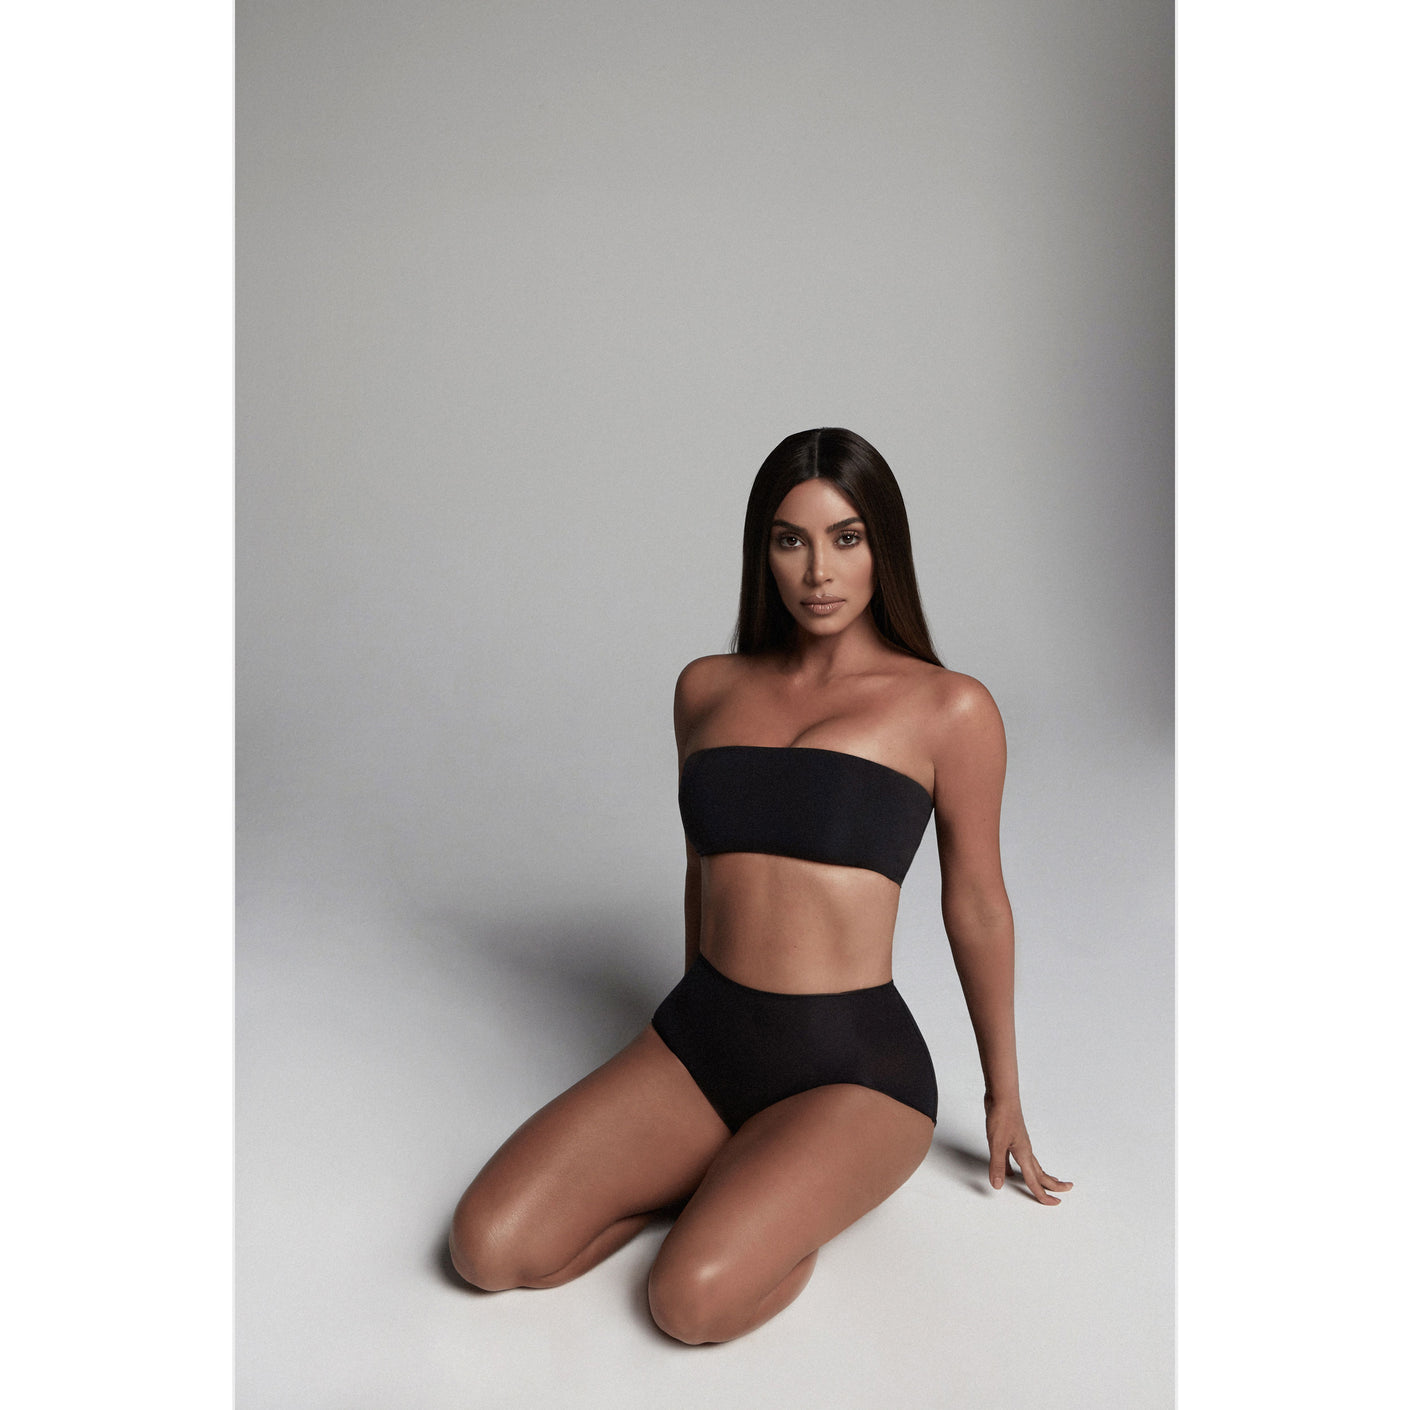 Authentic] SKIMS Fit Everybody Bandeau Bra in Clay, Women's Fashion, New  Undergarments & Loungewear on Carousell